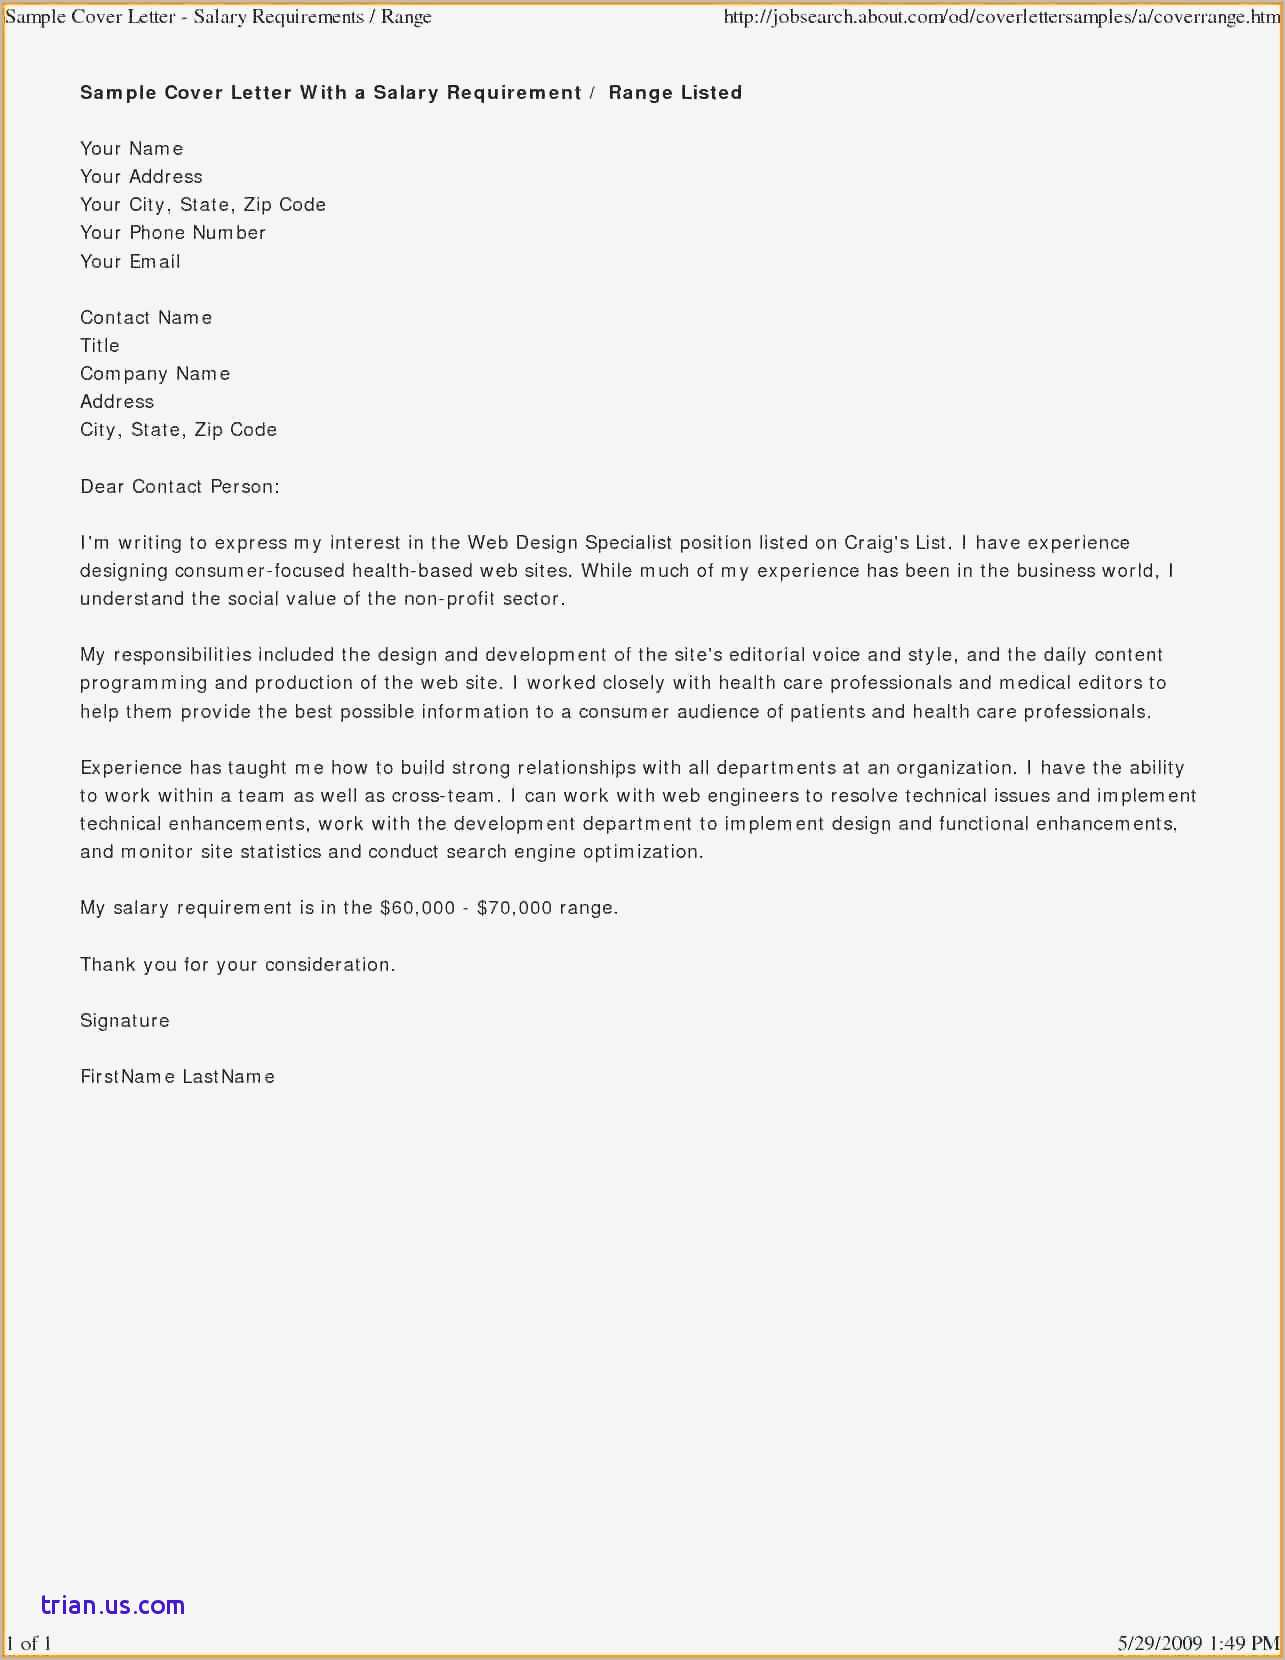 Invoice Letter Template for Professional Services - Letter Intent to Purchase Ideas Lovely Quotation Letter Template